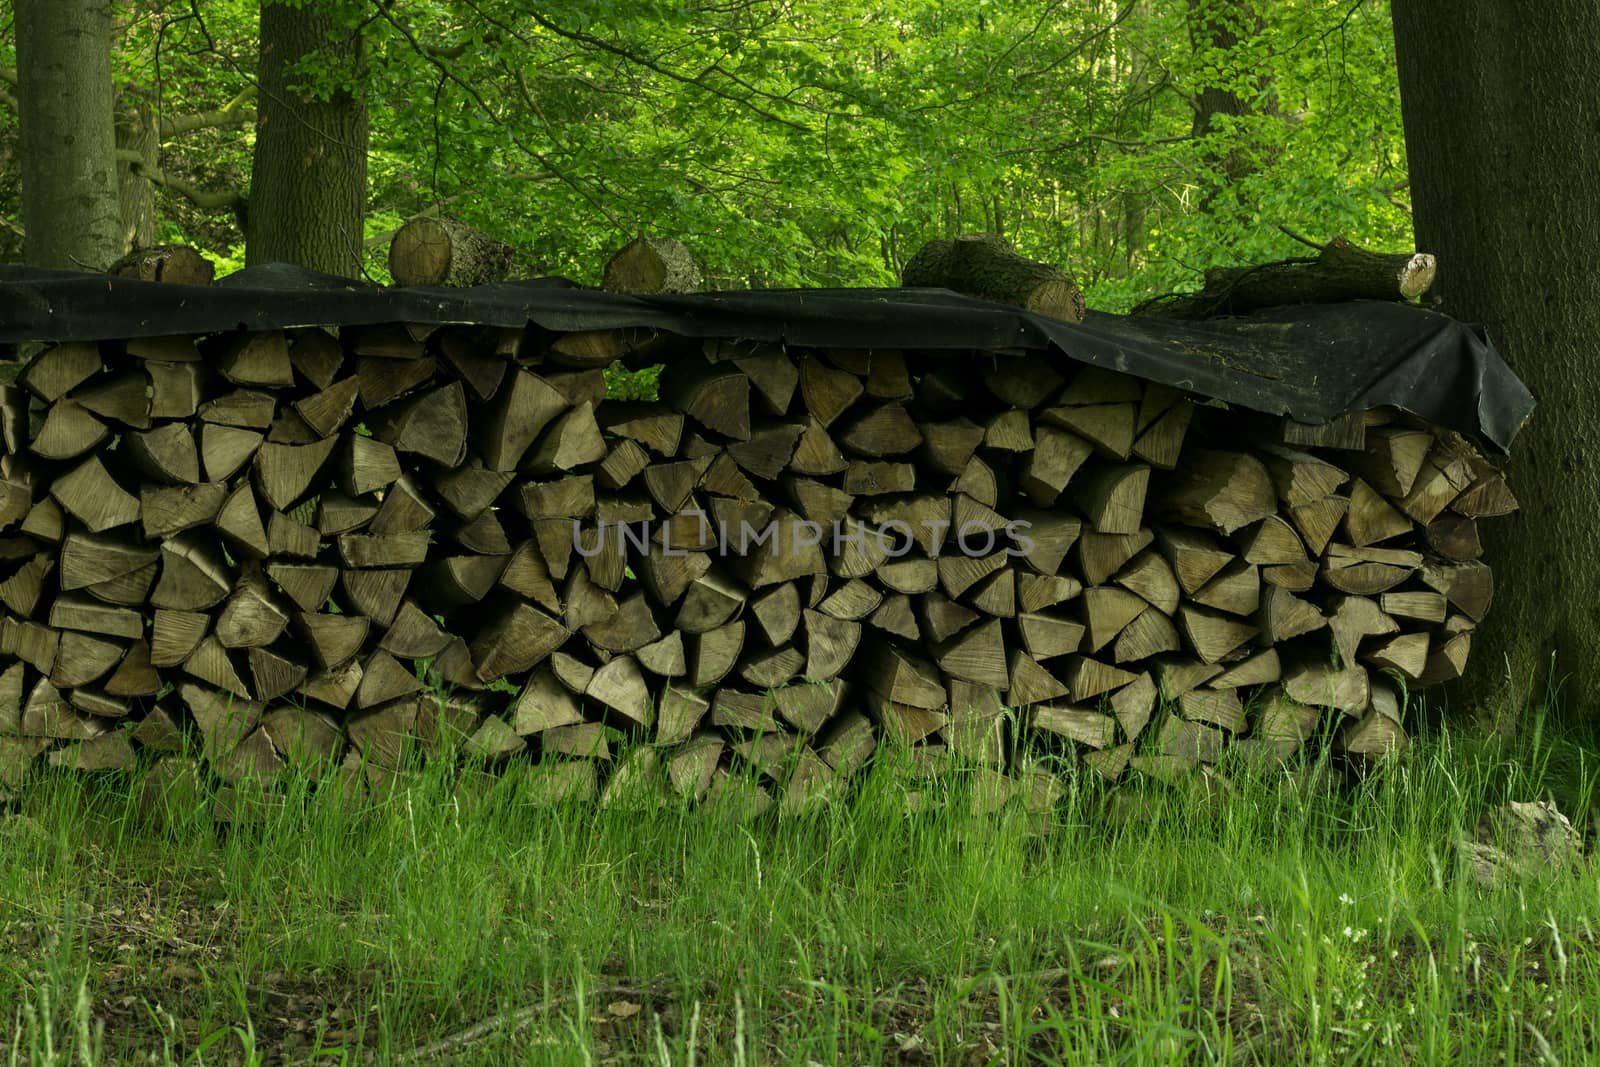 Germany: Stacked Firewood In The Forest In Lower Saxony